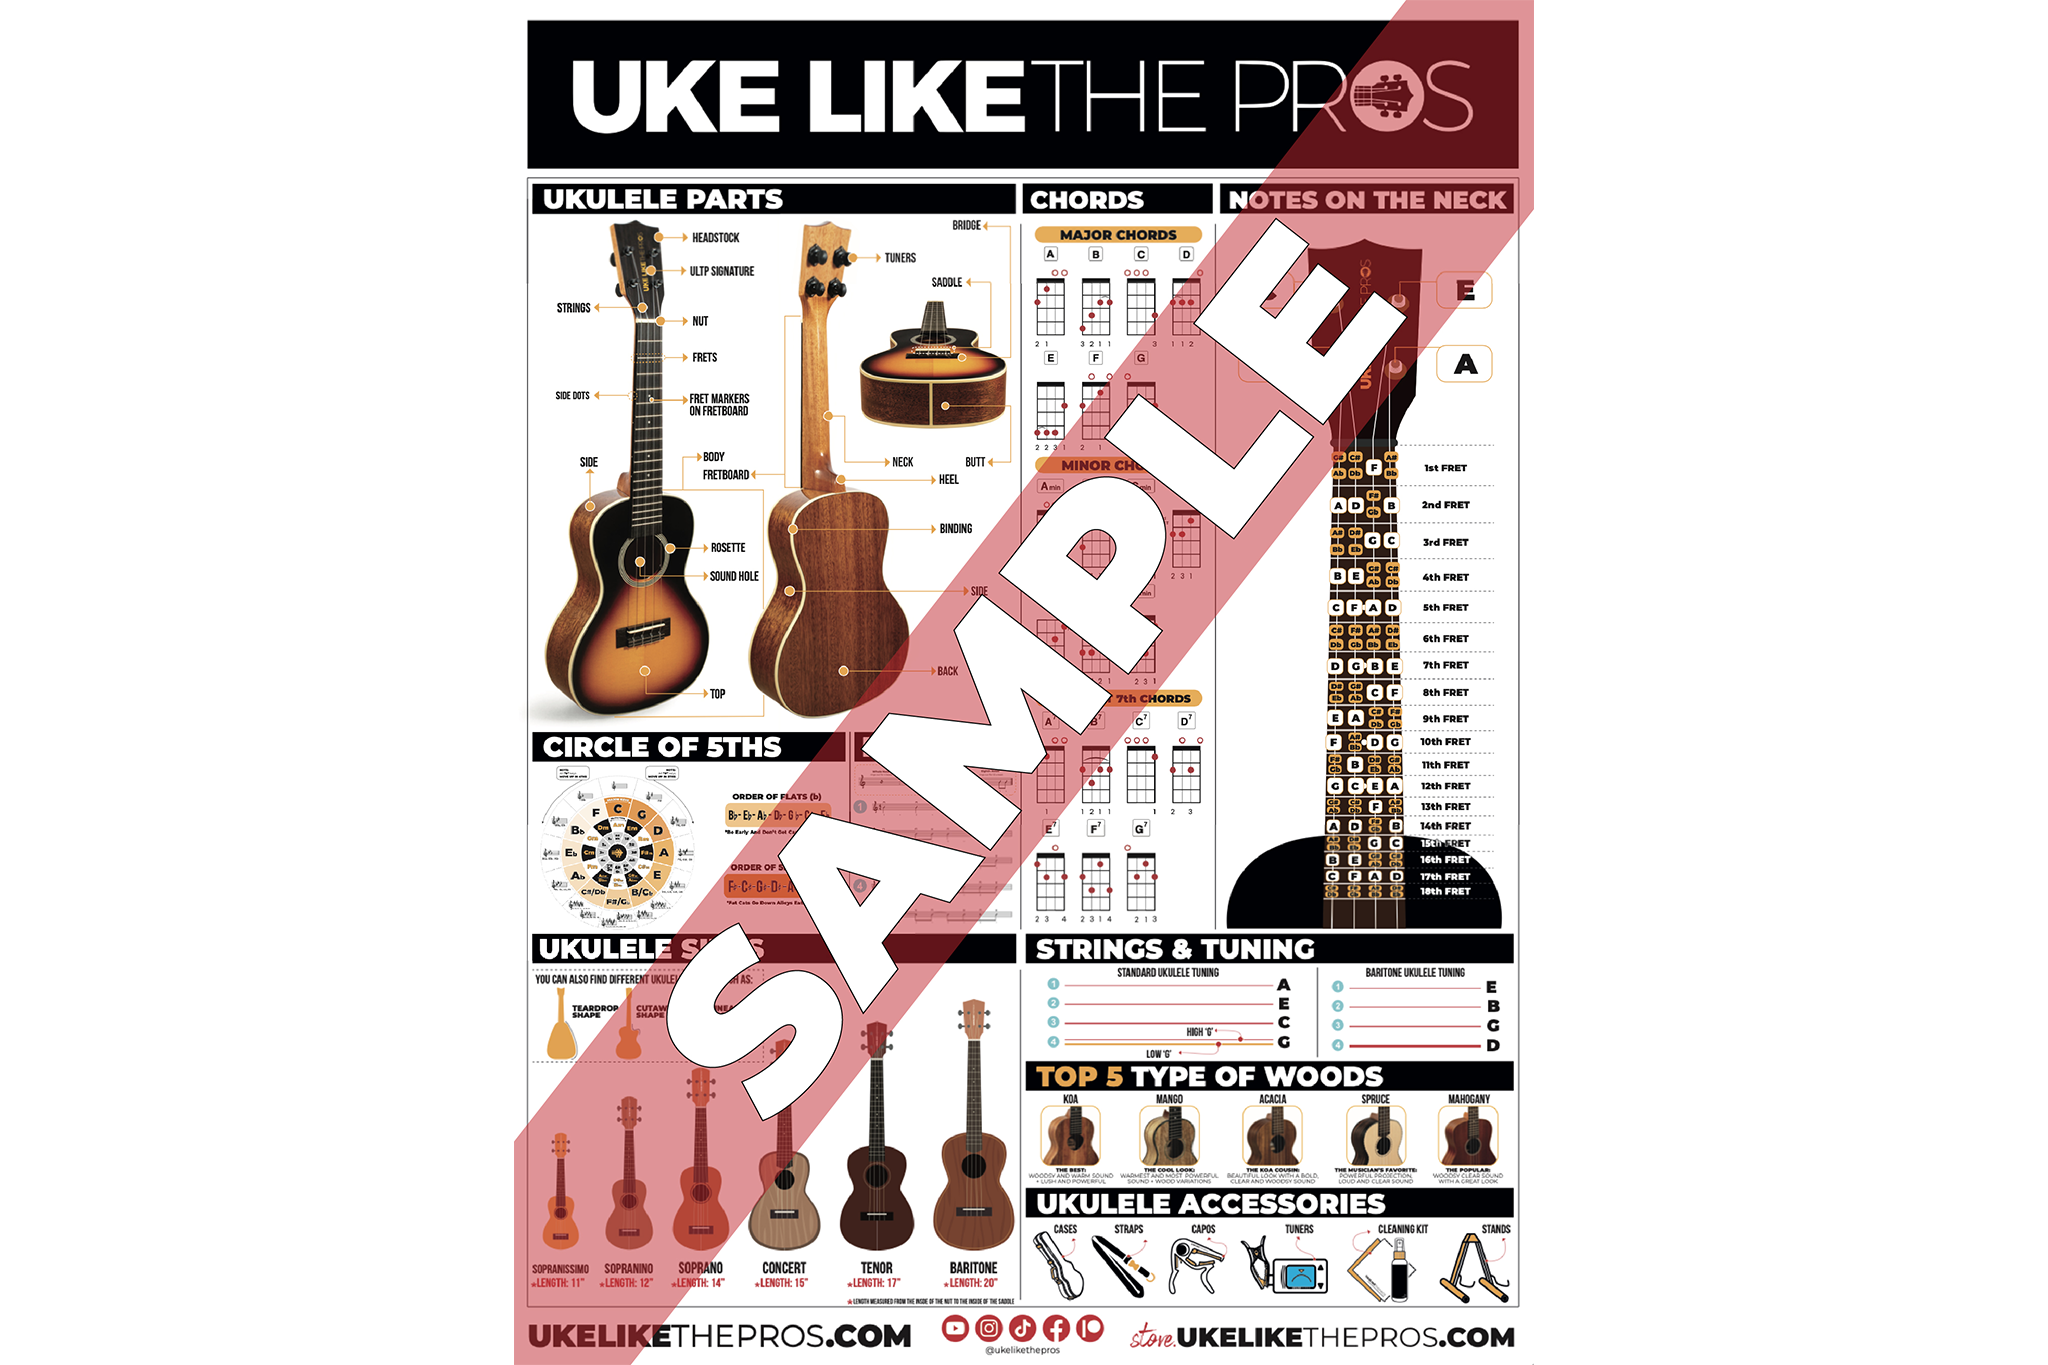 ULTP Everything Ukulele Poster! All you need to know!